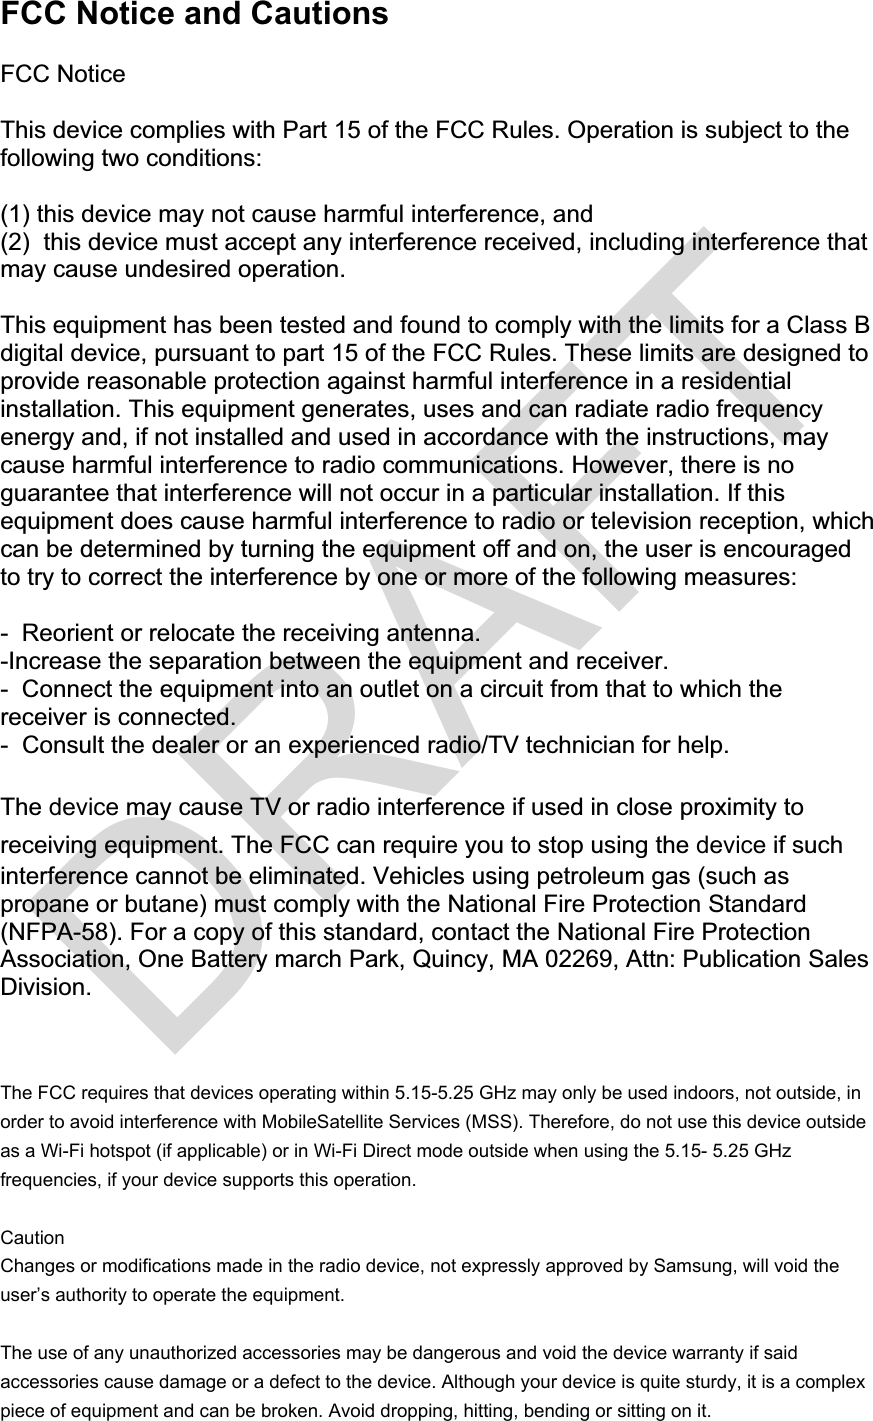 FCC Notice and Cautions FCC Notice This device complies with Part 15 of the FCC Rules. Operation is subject to the following two conditions: (1) this device may not cause harmful interference, and (2)  this device must accept any interference received, including interference that may cause undesired operation. This equipment has been tested and found to comply with the limits for a Class B digital device, pursuant to part 15 of the FCC Rules. These limits are designed to provide reasonable protection against harmful interference in a residential installation. This equipment generates, uses and can radiate radio frequency energy and, if not installed and used in accordance with the instructions, may cause harmful interference to radio communications. However, there is no guarantee that interference will not occur in a particular installation. If this equipment does cause harmful interference to radio or television reception, which can be determined by turning the equipment off and on, the user is encouraged to try to correct the interference by one or more of the following measures: -  Reorient or relocate the receiving antenna.  -Increase the separation between the equipment and receiver. -  Connect the equipment into an outlet on a circuit from that to which the receiver is connected. -  Consult the dealer or an experienced radio/TV technician for help. The device may cause TV or radio interference if used in close proximity toreceiving equipment. The FCC can require you to stop using the device if suchinterference cannot be eliminated. Vehicles using petroleum gas (such as propane or butane) must comply with the National Fire Protection Standard (NFPA-58). For a copy of this standard, contact the National Fire Protection Association, One Battery march Park, Quincy, MA 02269, Attn: Publication Sales Division. The FCC requires that devices operating within 5.15-5.25 GHz may only be used indoors, not outside, in order to avoid interference with MobileSatellite Services (MSS). Therefore, do not use this device outside as a Wi-Fi hotspot (if applicable) or in Wi-Fi Direct mode outside when using the 5.15- 5.25 GHz frequencies, if your device supports this operation.Caution Changes or modifications made in the radio device, not expressly approved by Samsung, will void the user’s authority to operate the equipment.The use of any unauthorized accessories may be dangerous and void the device warranty if said accessories cause damage or a defect to the device. Although your device is quite sturdy, it is a complex piece of equipment and can be broken. Avoid dropping, hitting, bending or sitting on it.  DRAFT